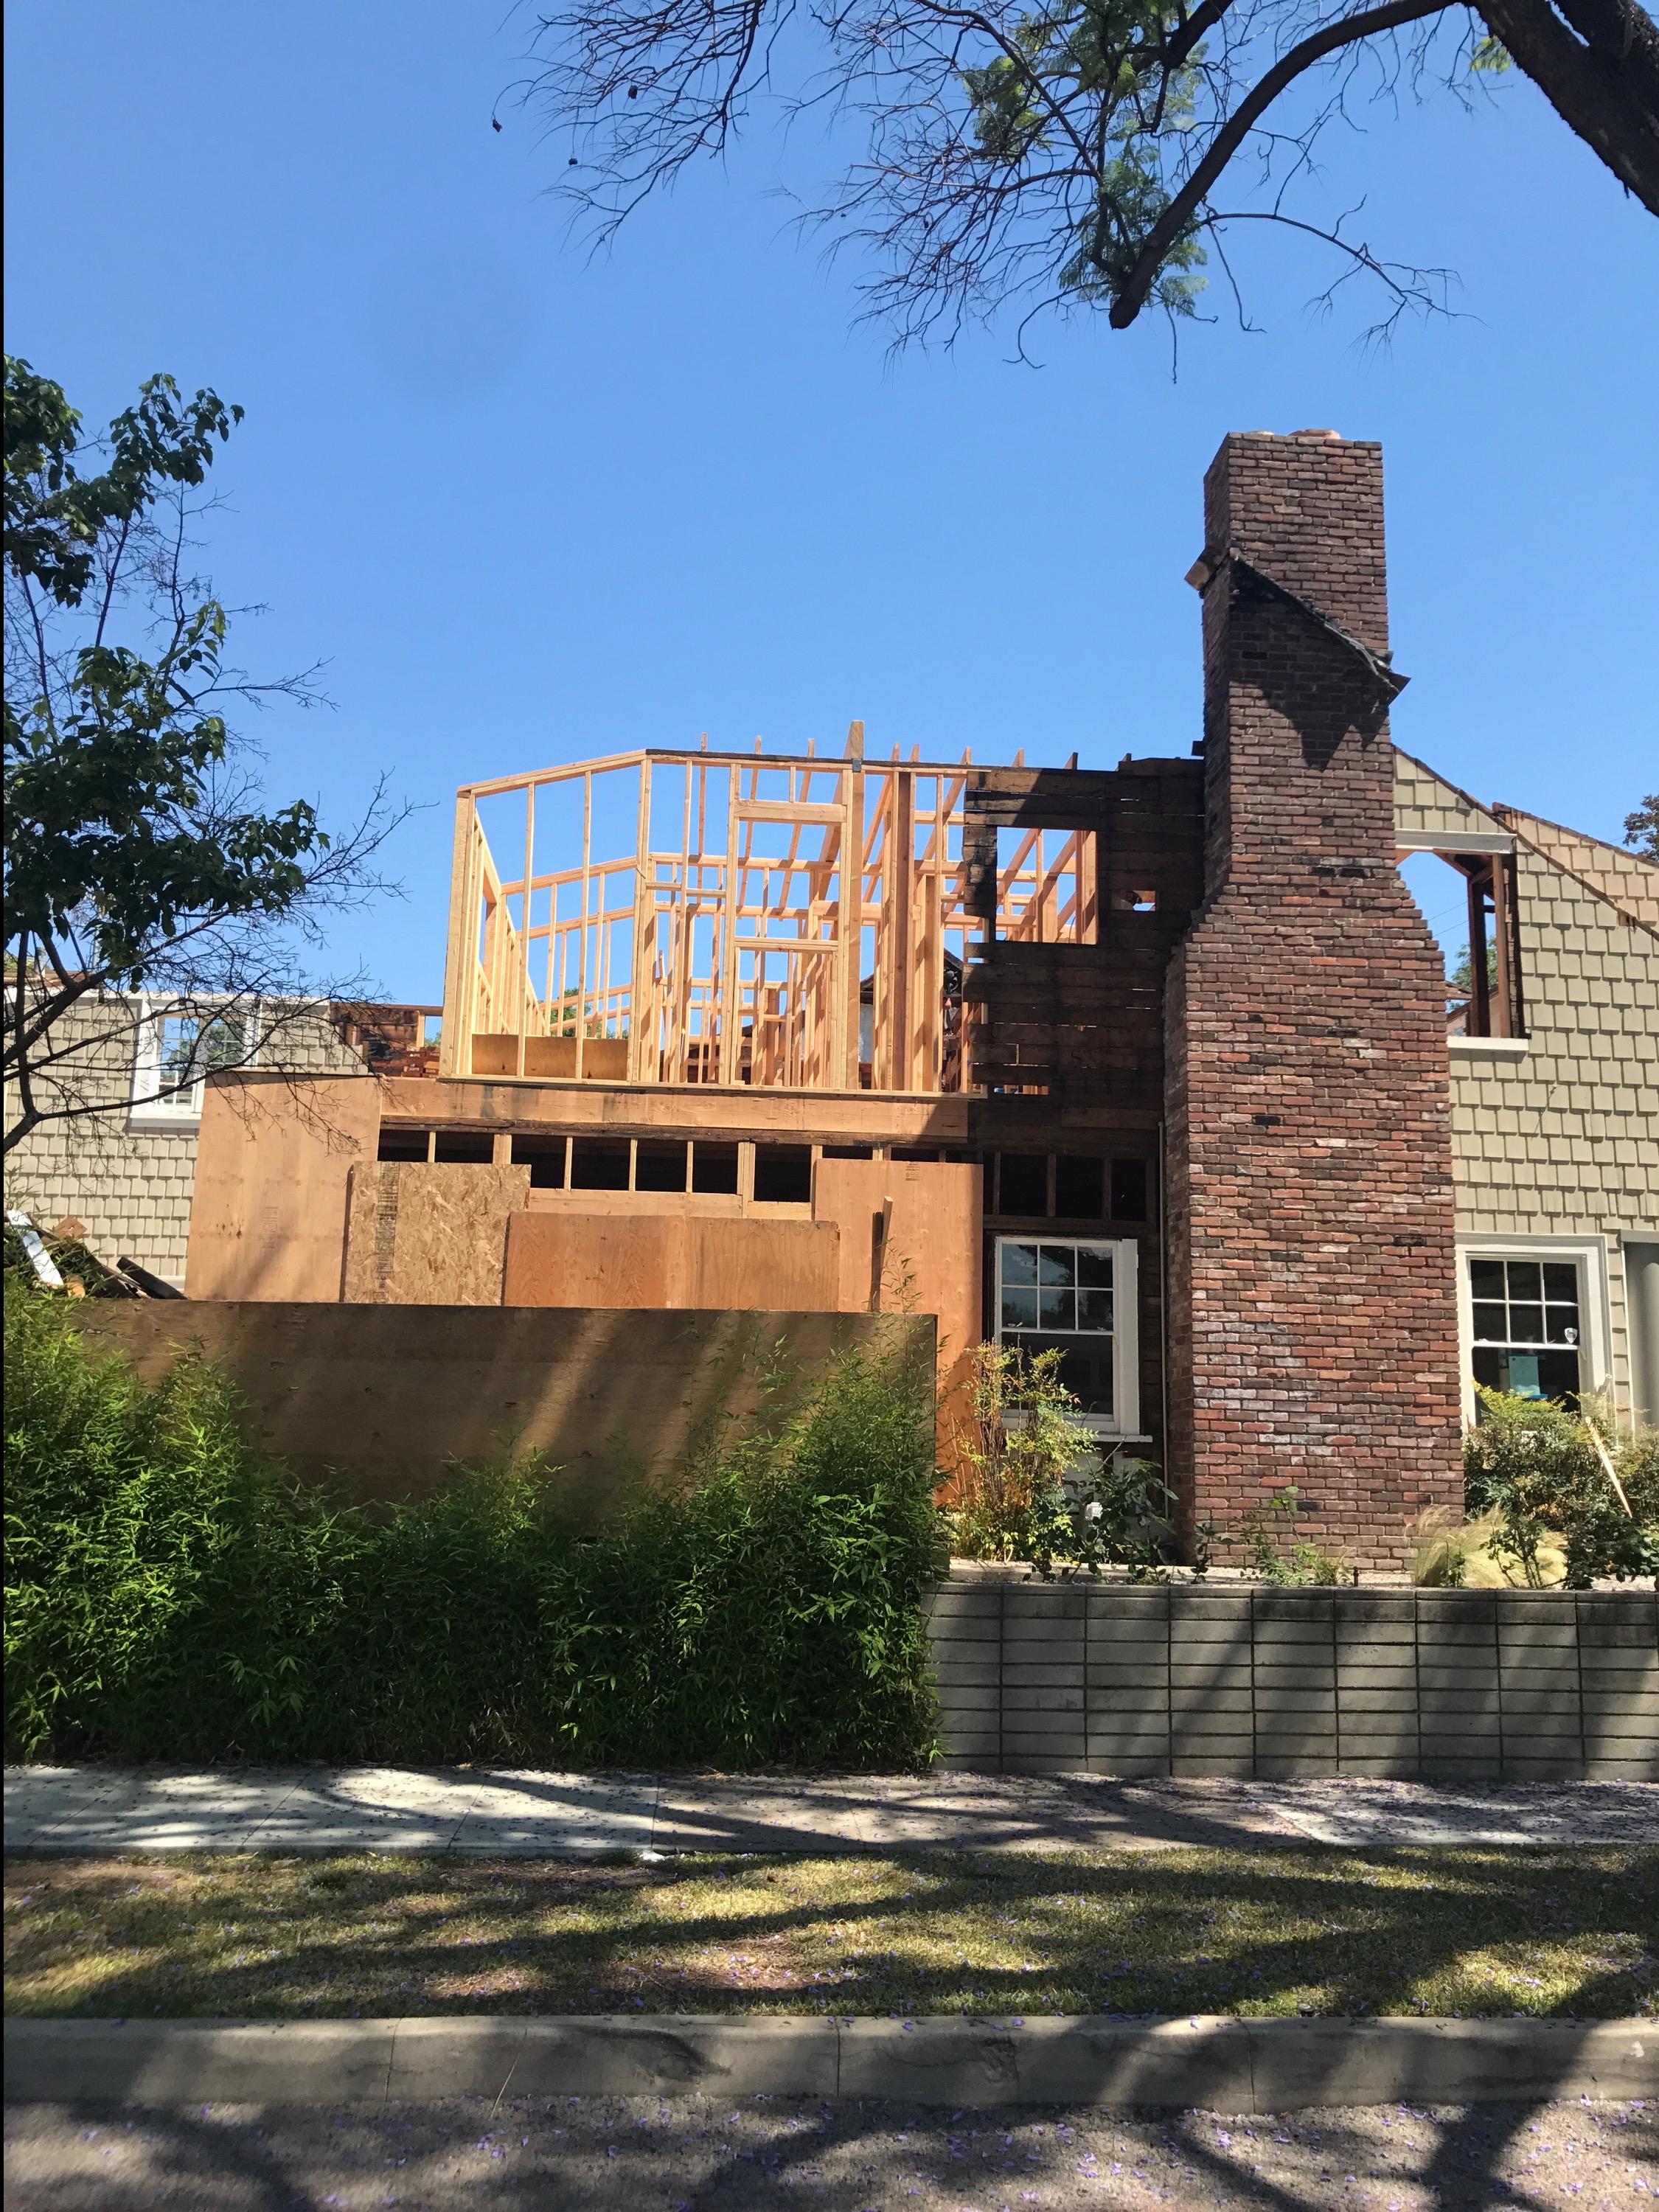 This home in Canoga Park, CA had severe damage after a fire. SERVPRO of Canoga Park / West Hills completed mitigation in the salvageable portion of the home, and the reconstruction of the badly burned areas.